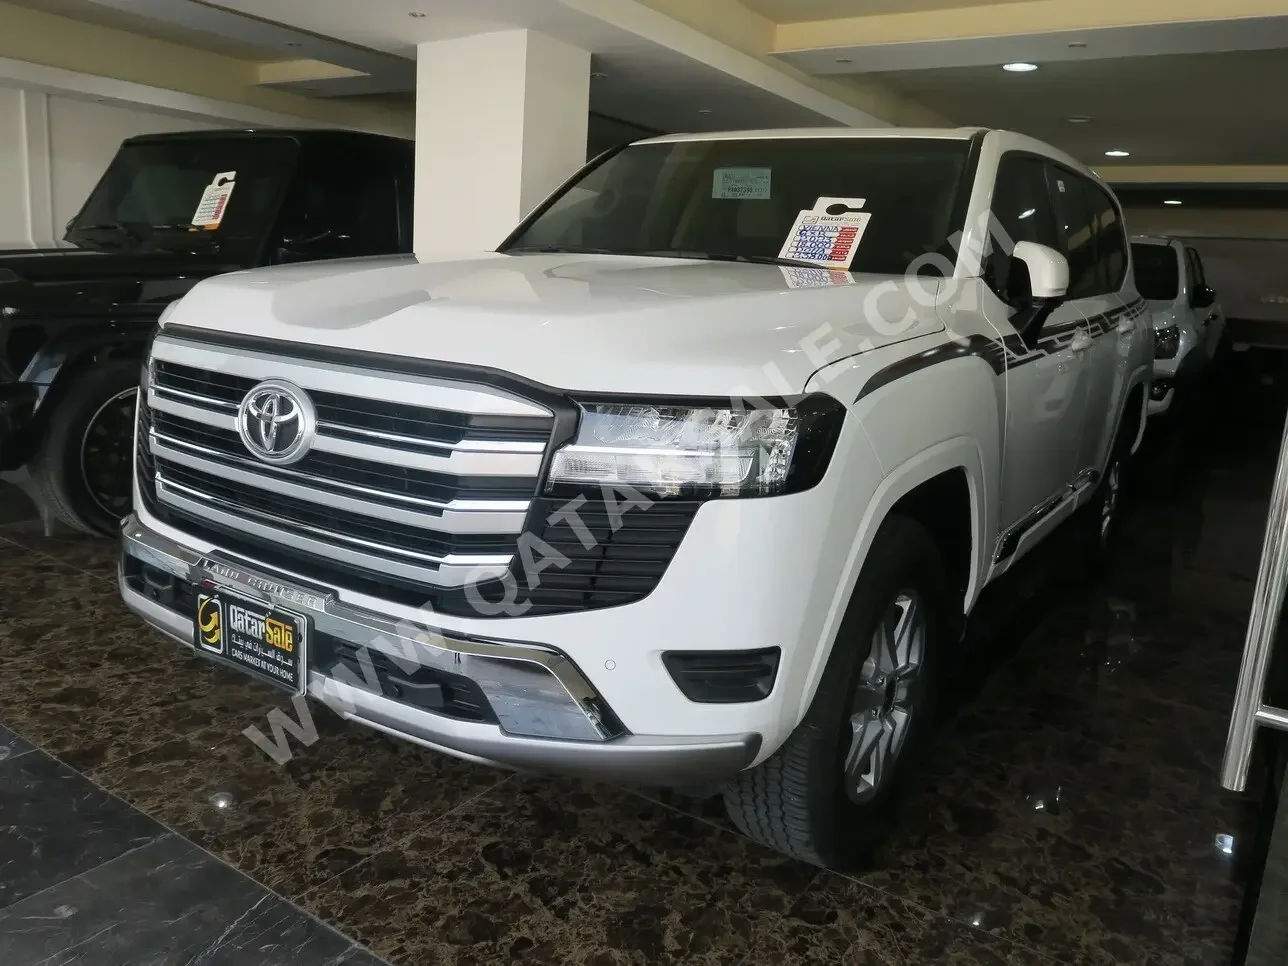 Toyota  Land Cruiser  GXR  2023  Automatic  18,000 Km  6 Cylinder  Four Wheel Drive (4WD)  SUV  White  With Warranty